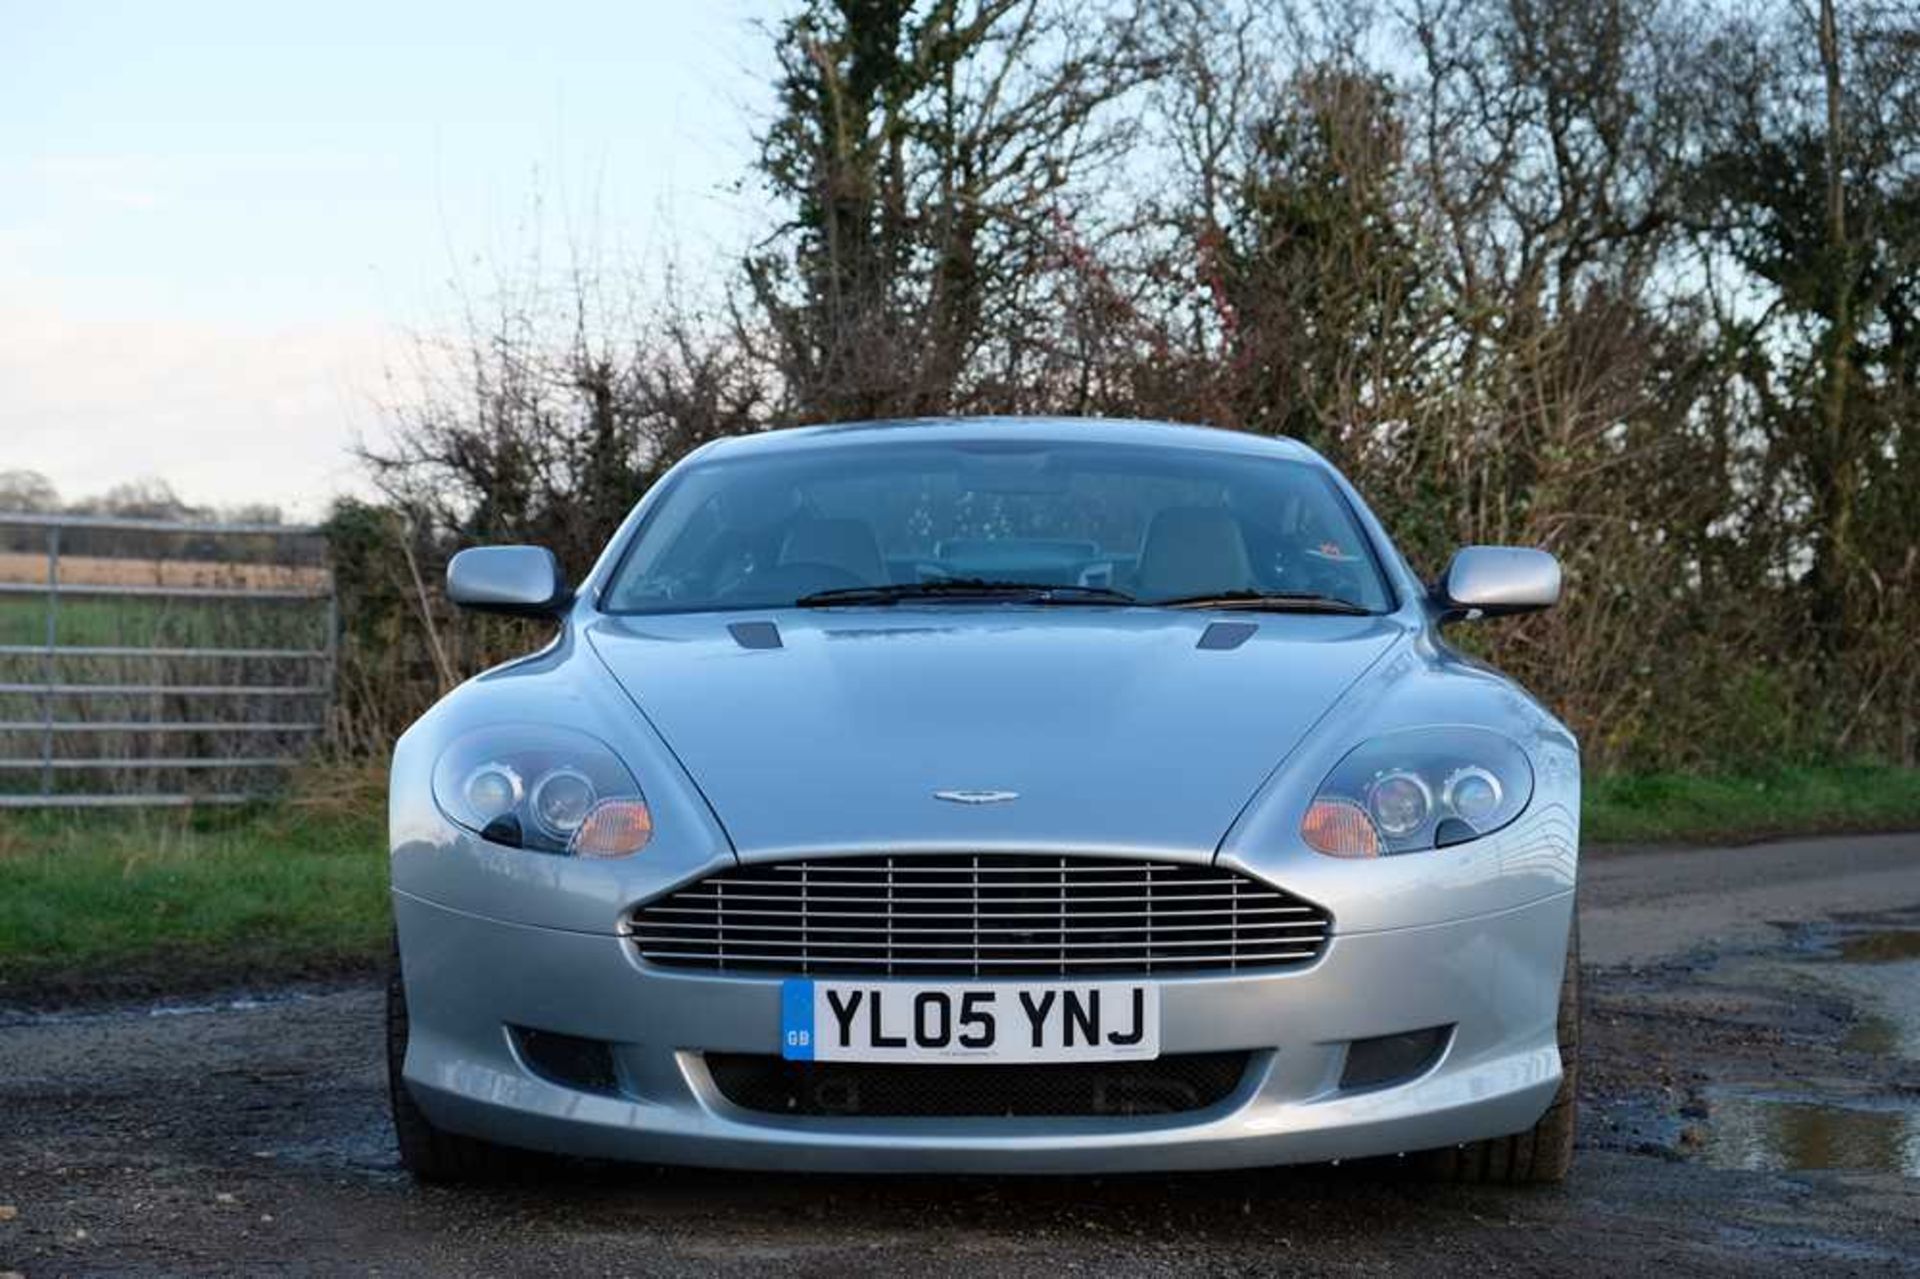 2005 Aston Martin DB9 c.25,000 from new and 4 former keepers - Image 12 of 59